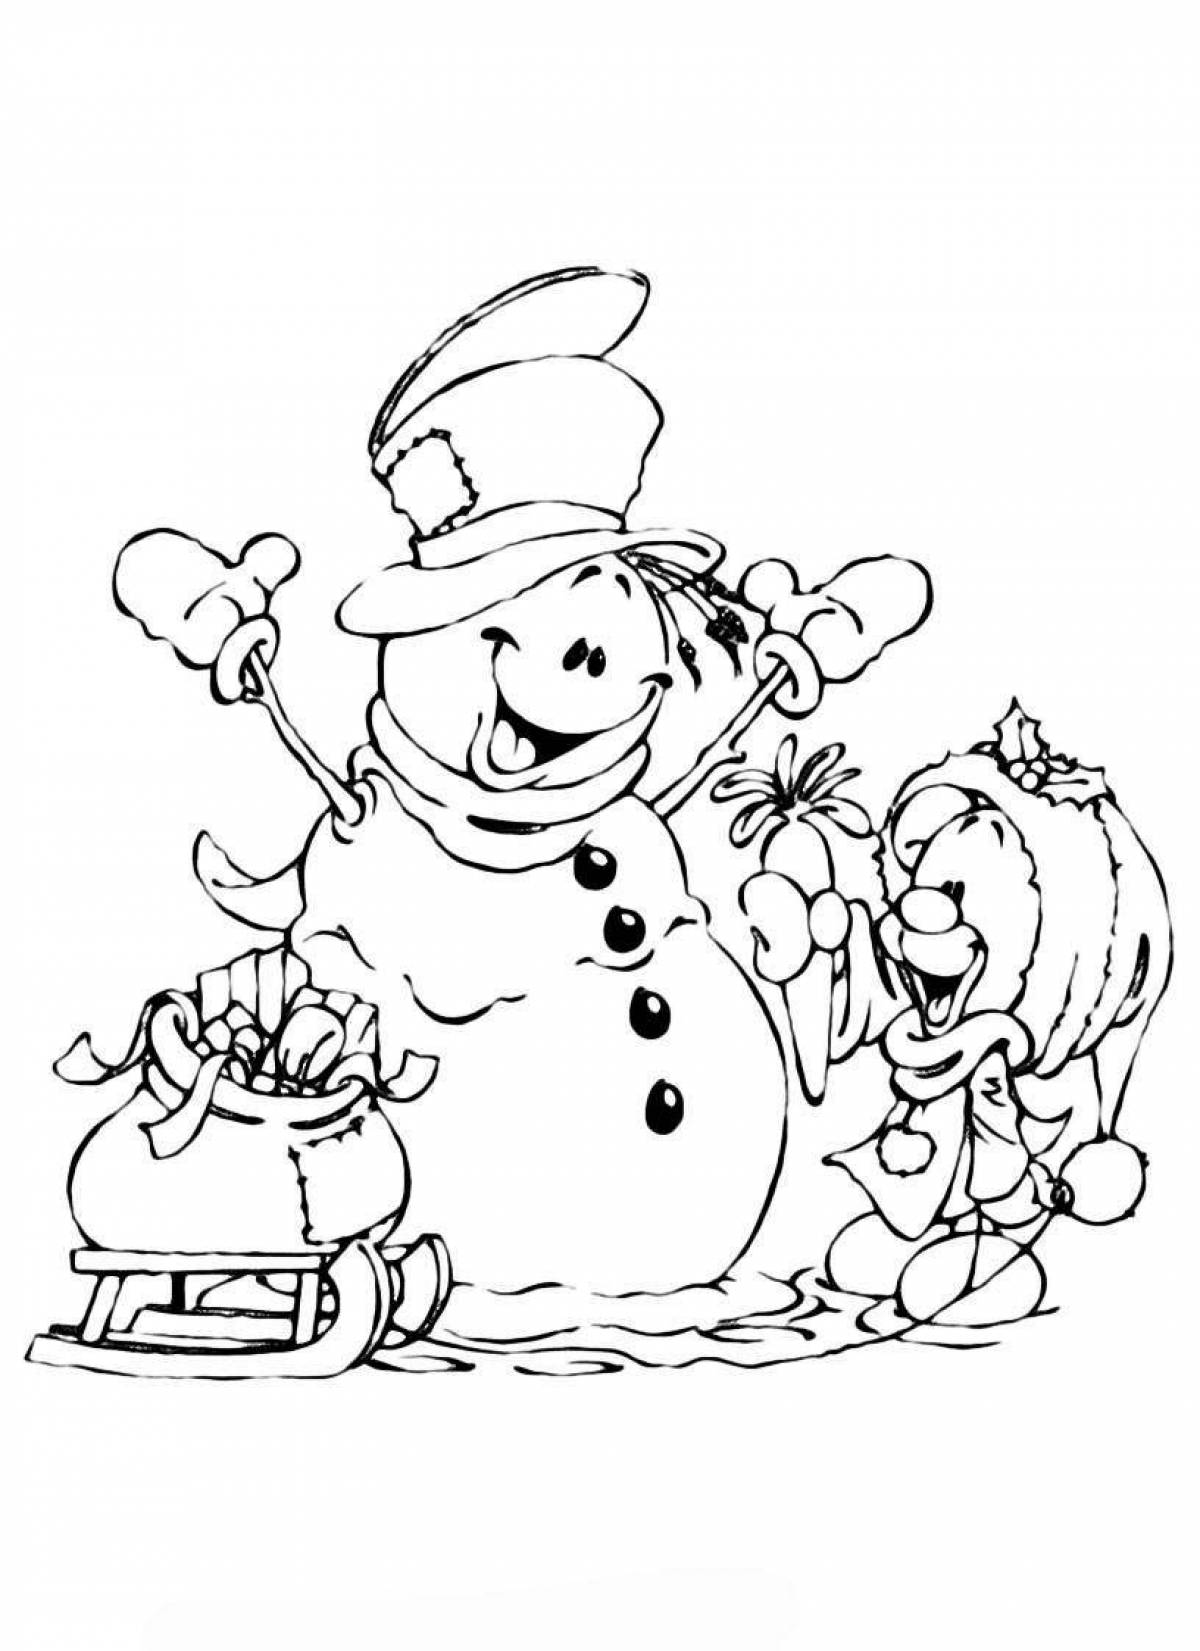 Coloring card with a playful snowman